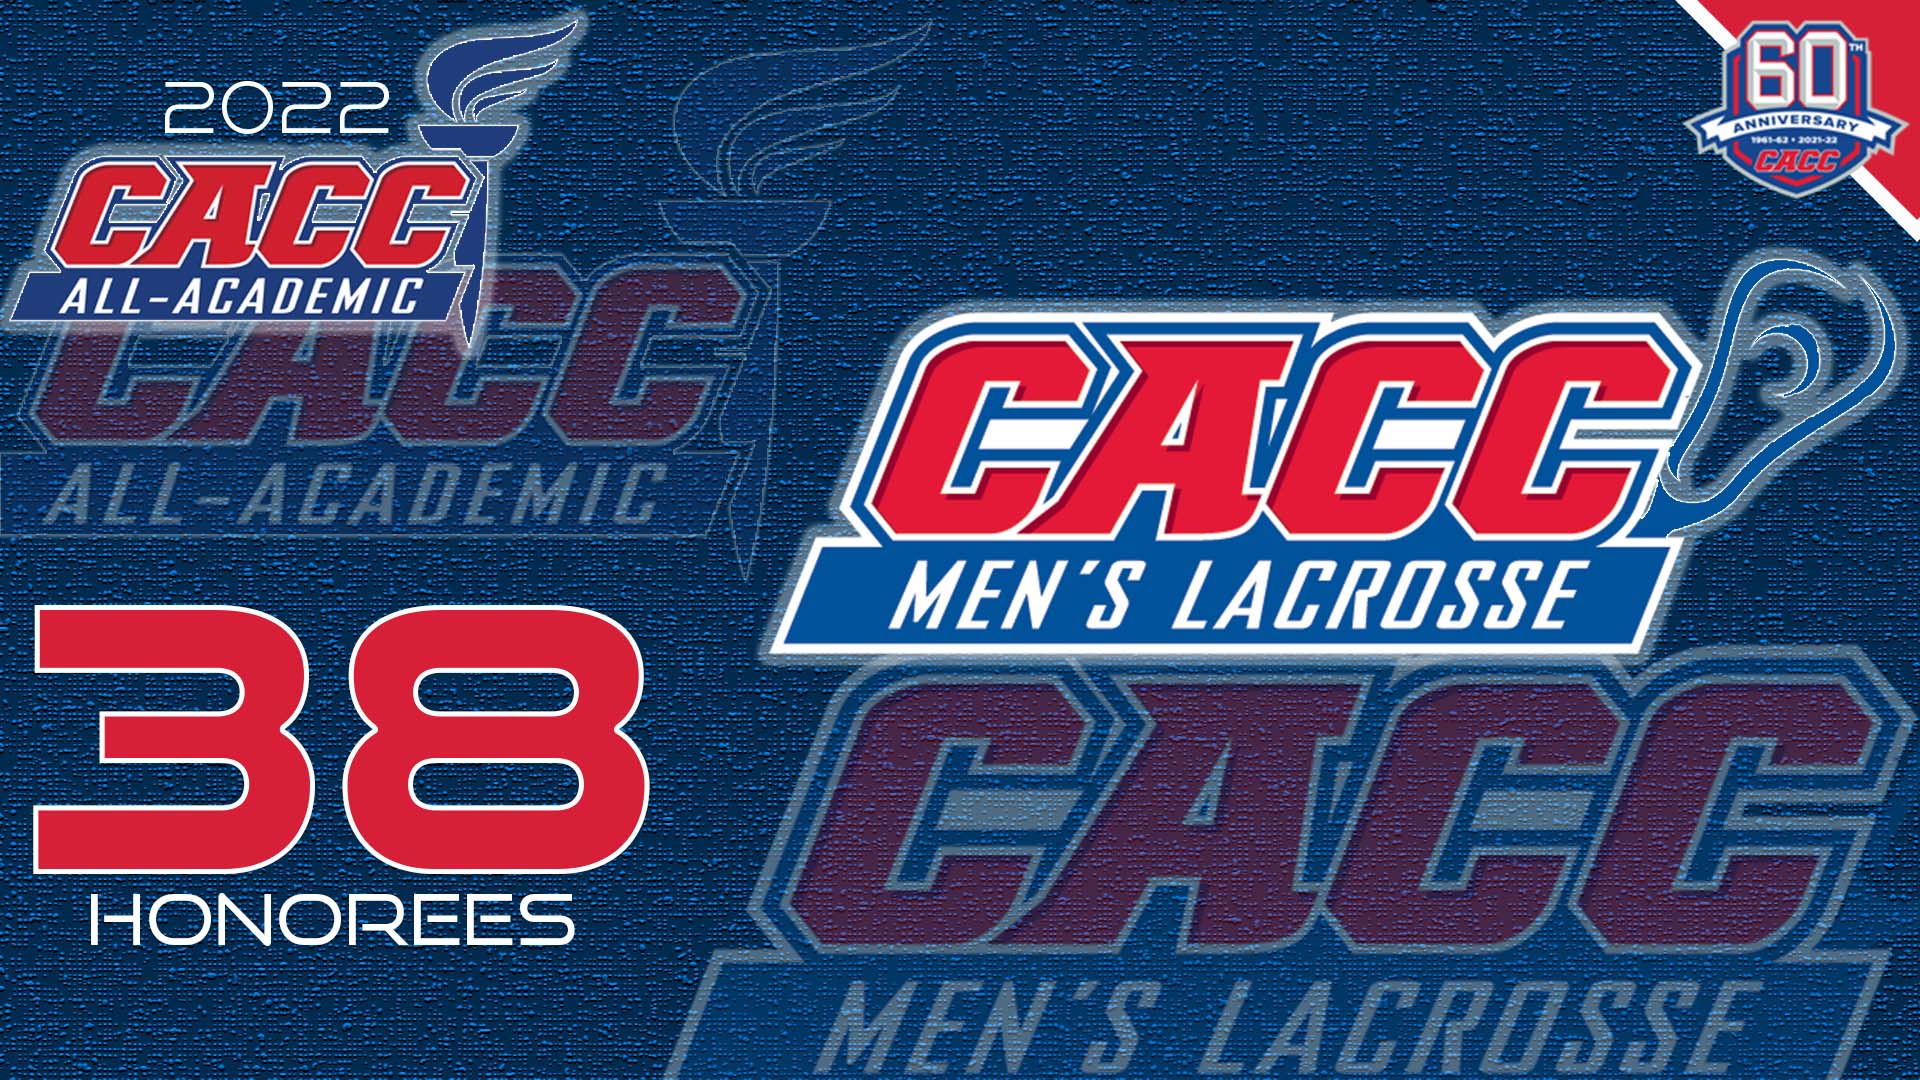 O'LOUGHLIN AND BARKER NAMED TO CACC MLAX ALL-ACADEMIC TEAM